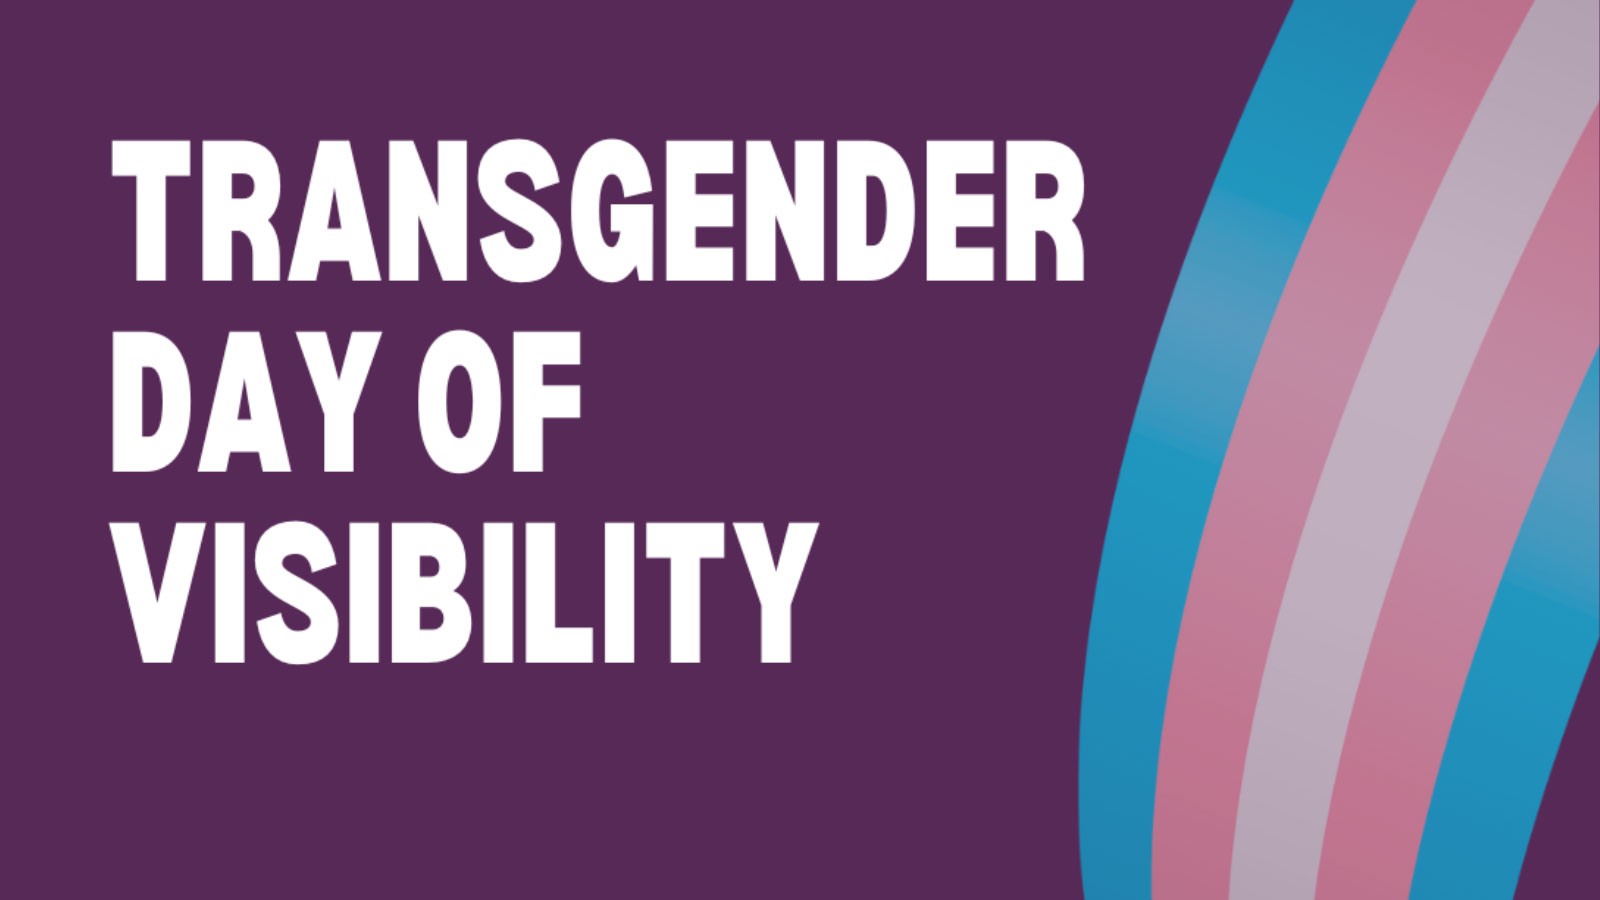 Fostering Belonging for Trans, Non-binary, and Genderqueer People